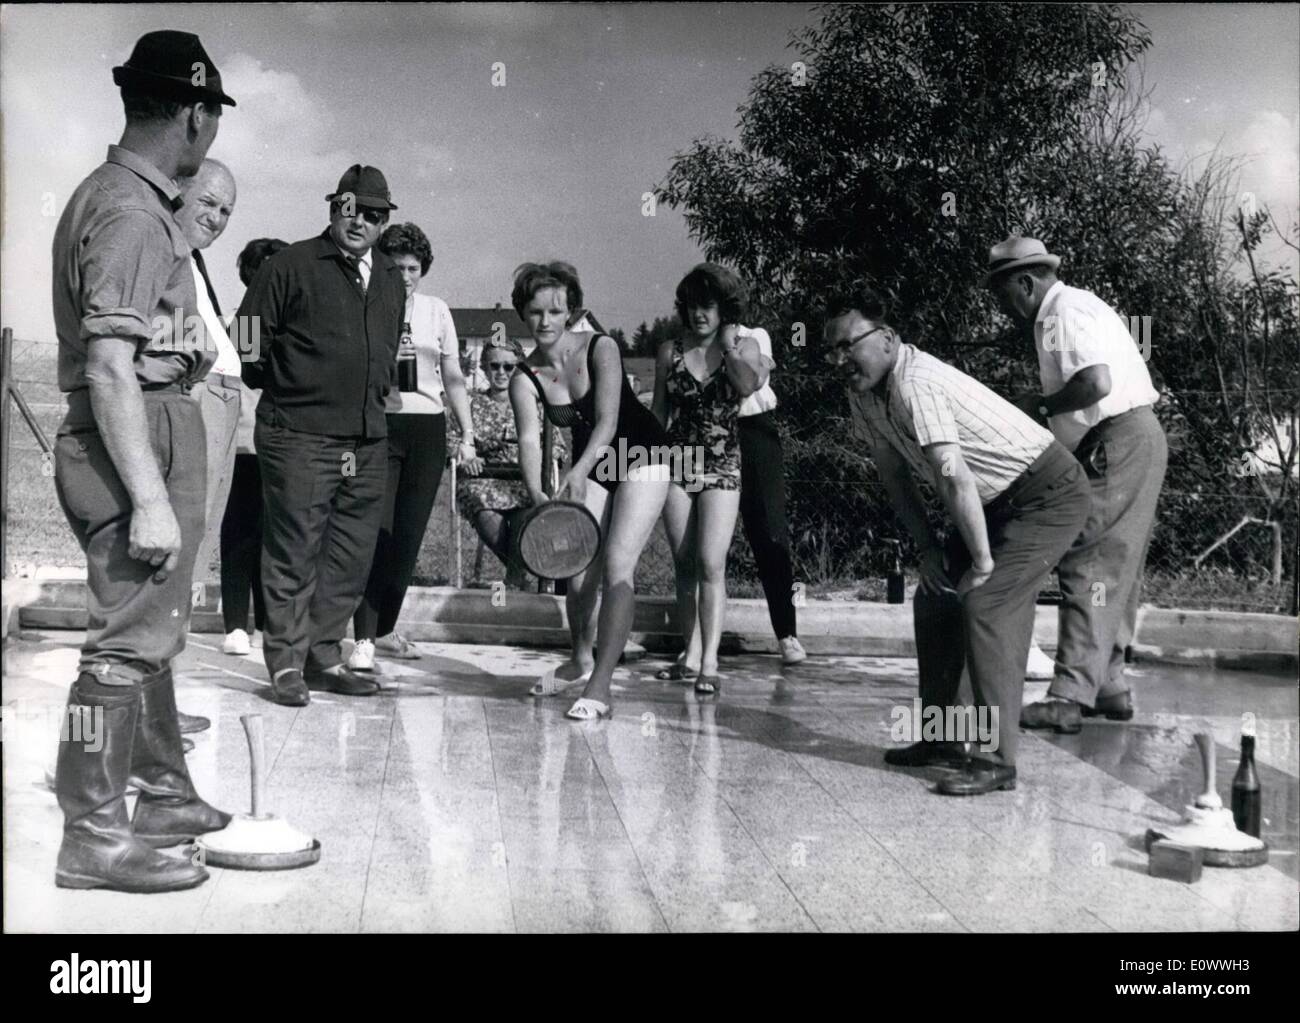 Jul. 07, 1964 - Provided For warm seasons......haven the curling shots from Teisnach - and Regental in Bavaria. In Patersdorf near Viechtach a Terrazzo-rank (Terrazzo - is polished concrete). Now it is possible play curling in the mid-summer dressed with a bathing-costumes. Stock Photo